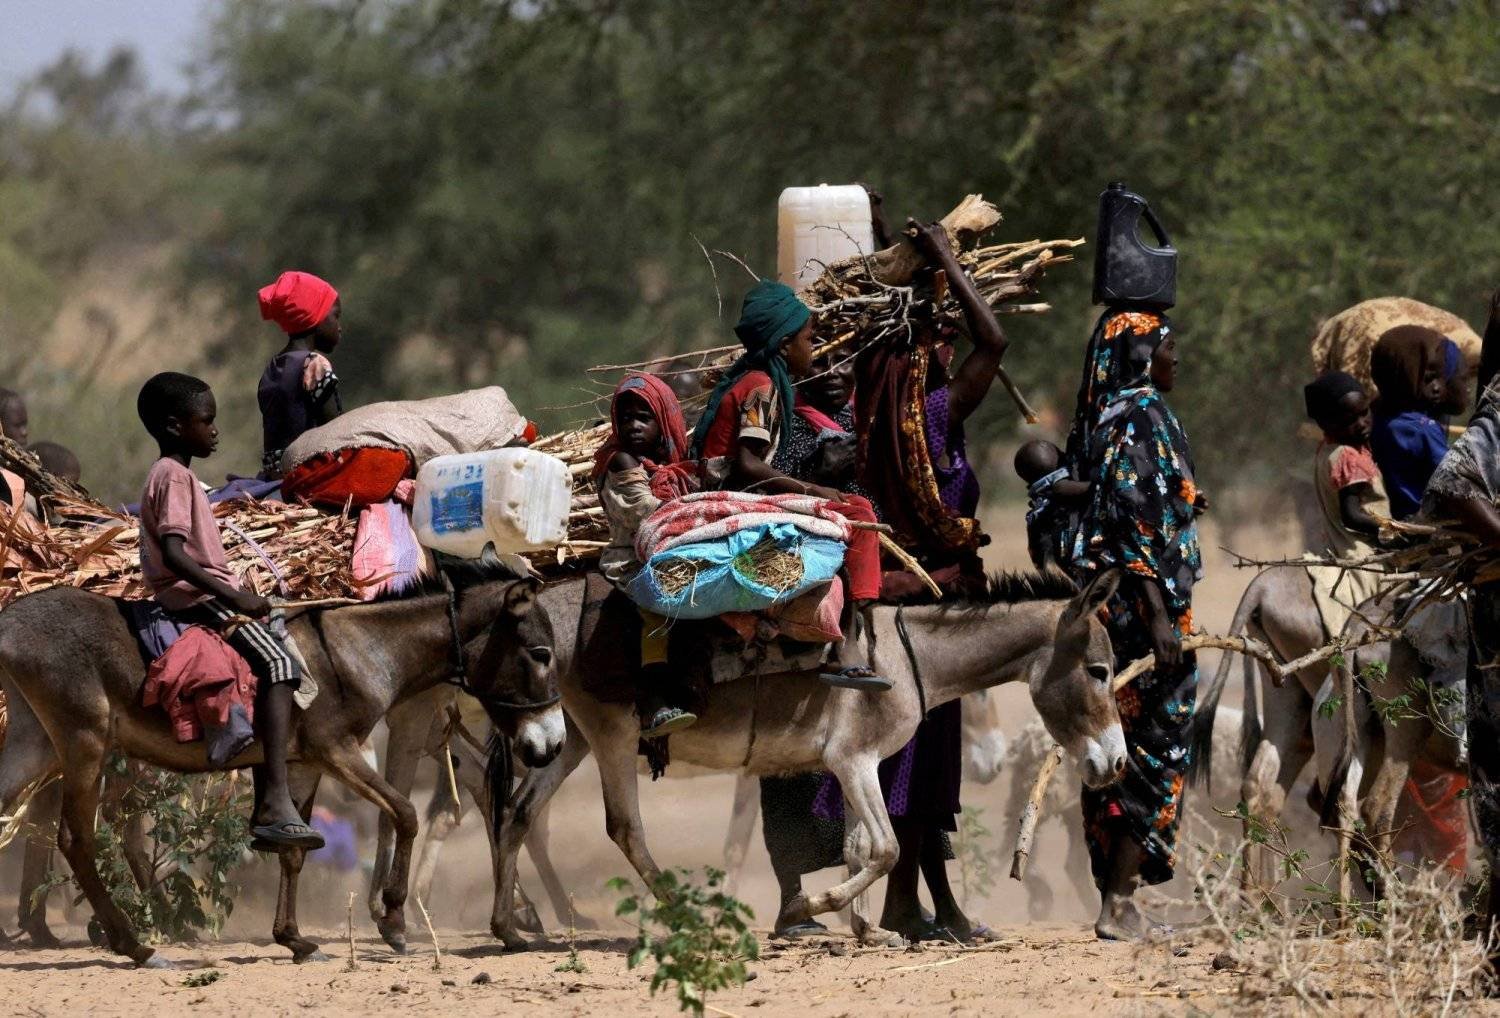 FILE PHOTO: Sudanese refugees who fled the violence in Sudan's Darfur region and newly arrived ride their donkeys looking for space to temporarily settle, near the border between Sudan and Chad in Goungour, Chad May 8, 2023. REUTERS/Zohra Bensemra/File Photo